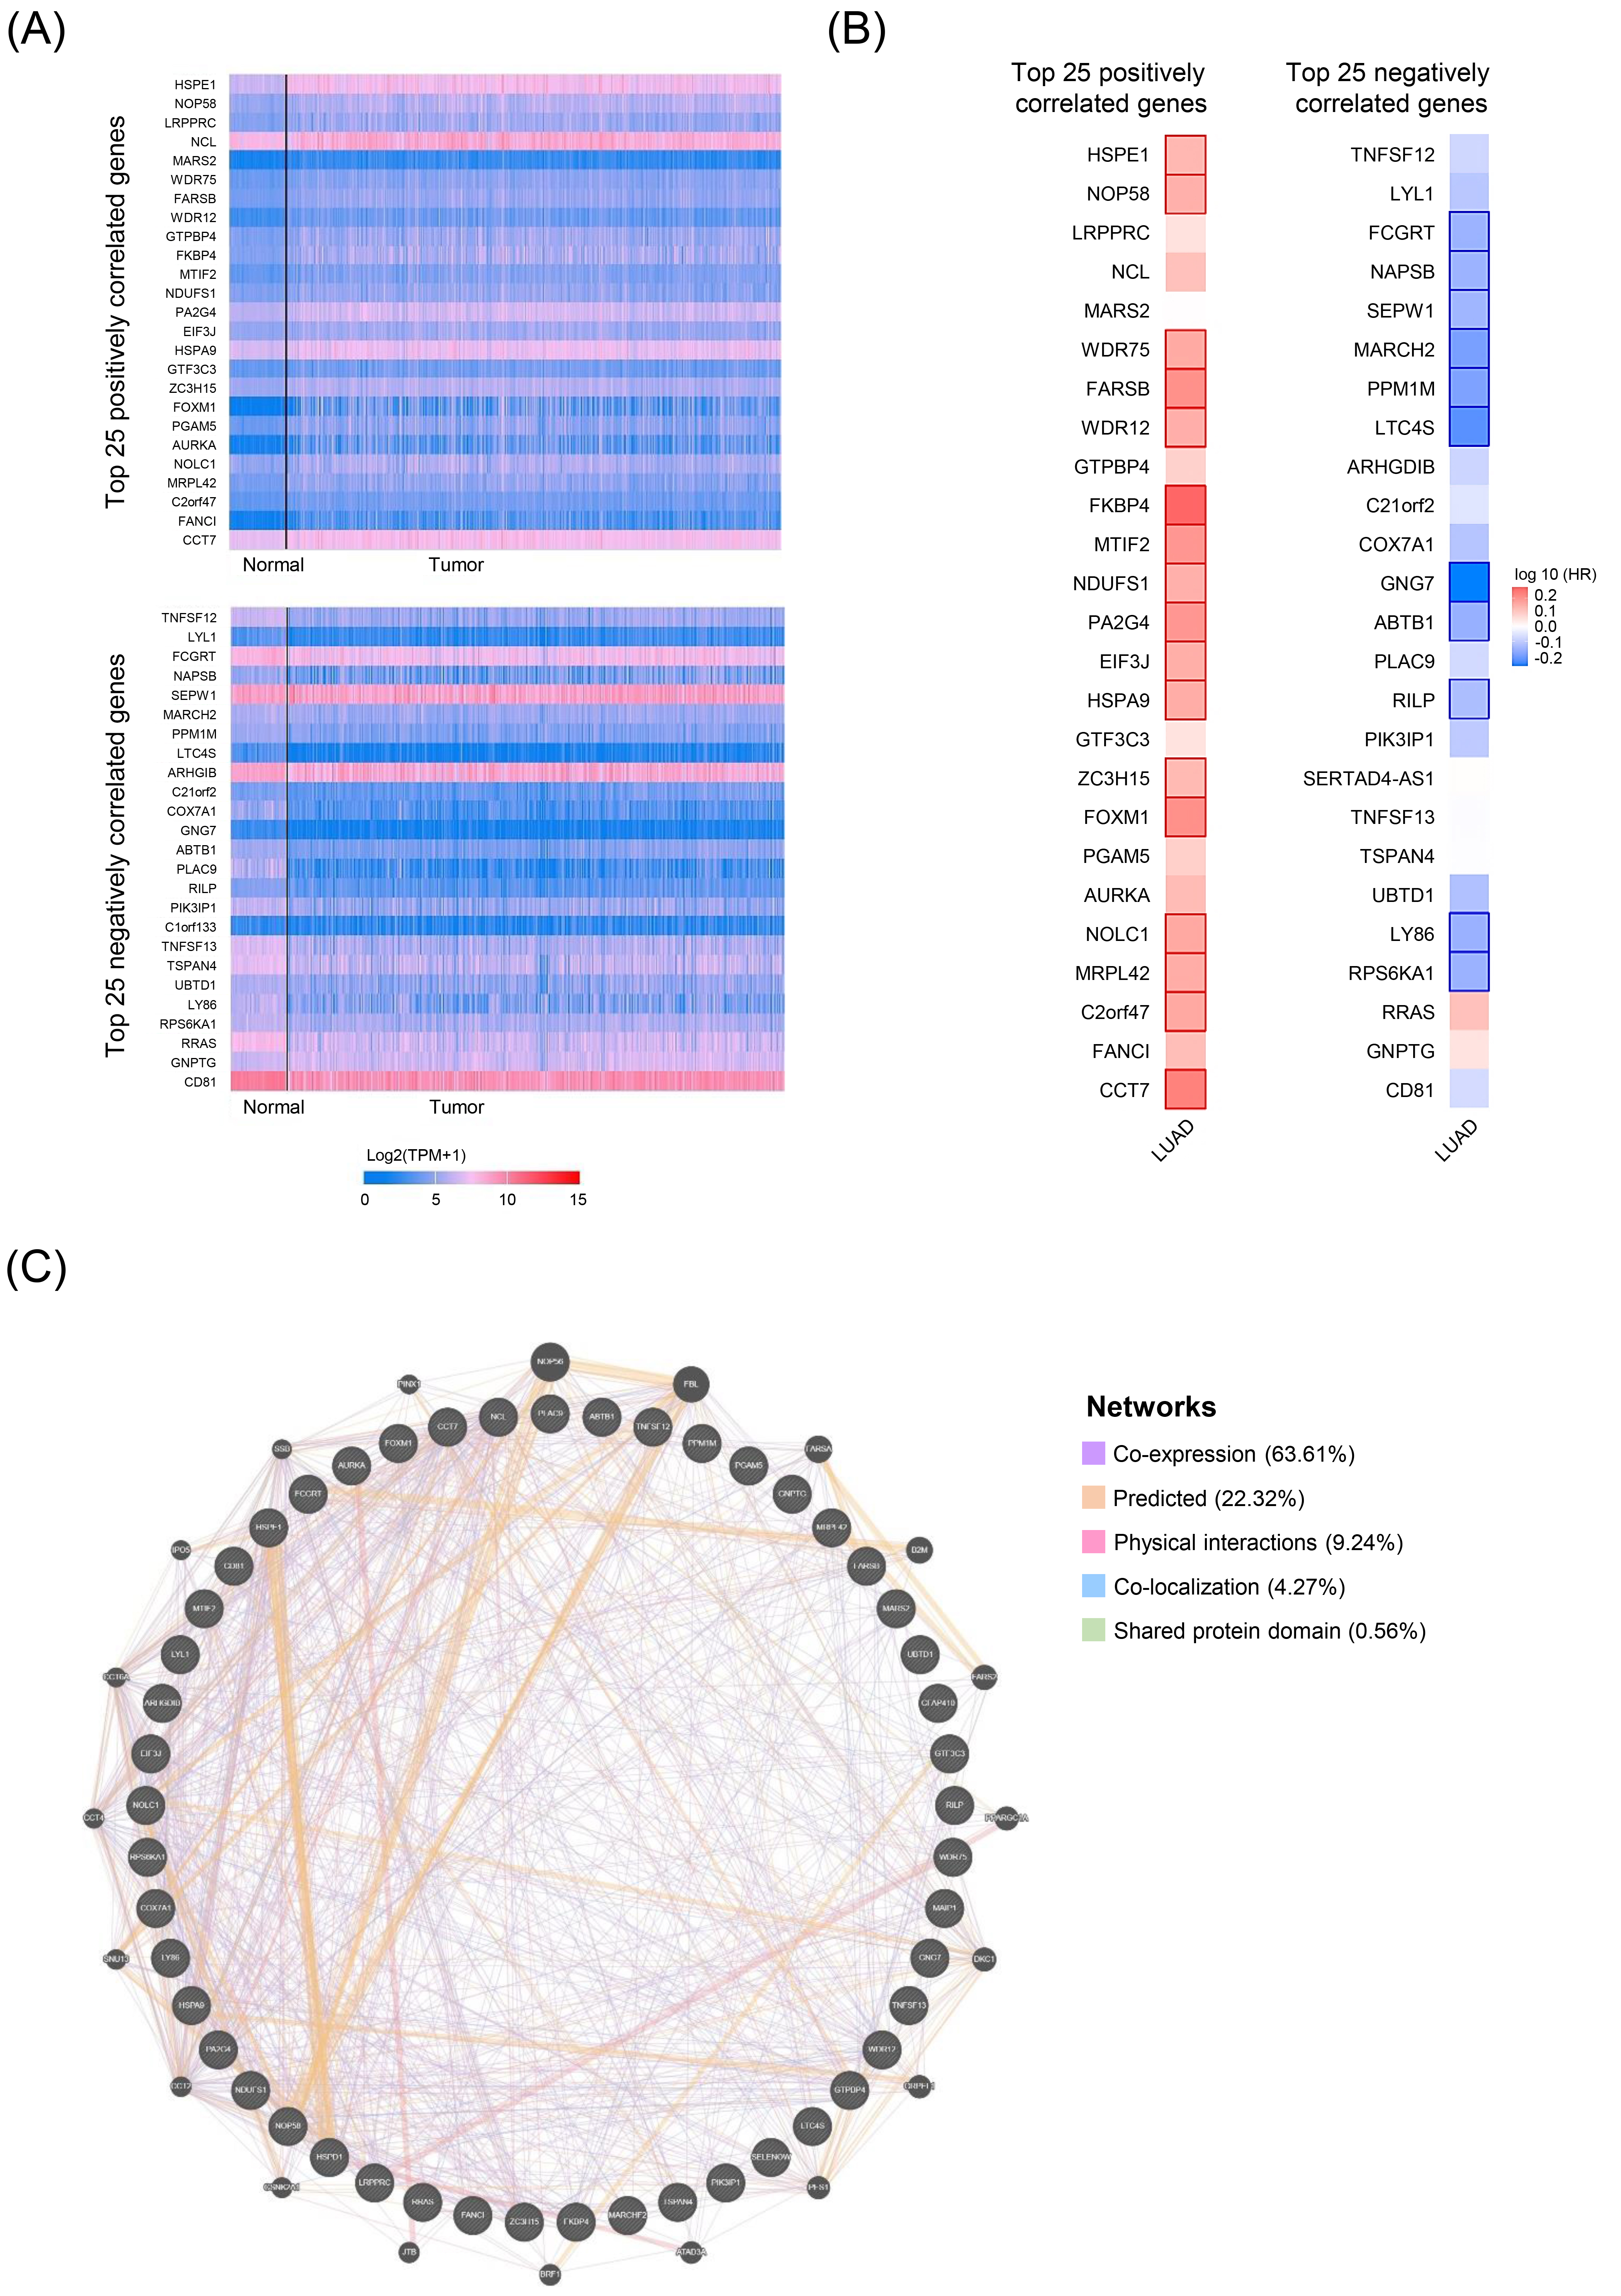 HSPD1-correlated genes in LUAD and their interaction network. (A) Expression heatmaps of top 25 genes that are positively and negatively correlated with HSPD1 in normal and LUAD tissues visualized by UALCAN. (B) Survival heatmaps of HSPD1-correlated genes in LUAD created by GEPIA2. Heatmaps show hazard ratio for different genes in overall survival of LUAD patients. Framed blocks represent statistical significance in prognostic analysis. (C) Interaction network of HSPD1-correlated genes constructed by GeneMANIA.